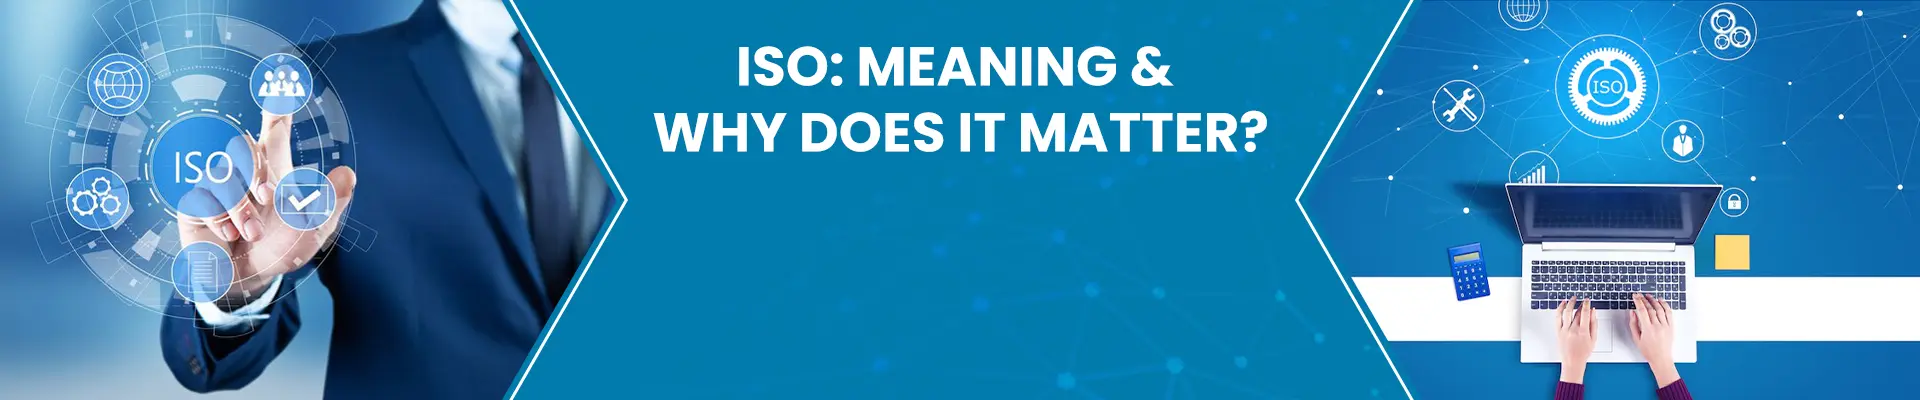 ISO Meaning and Why does it matter